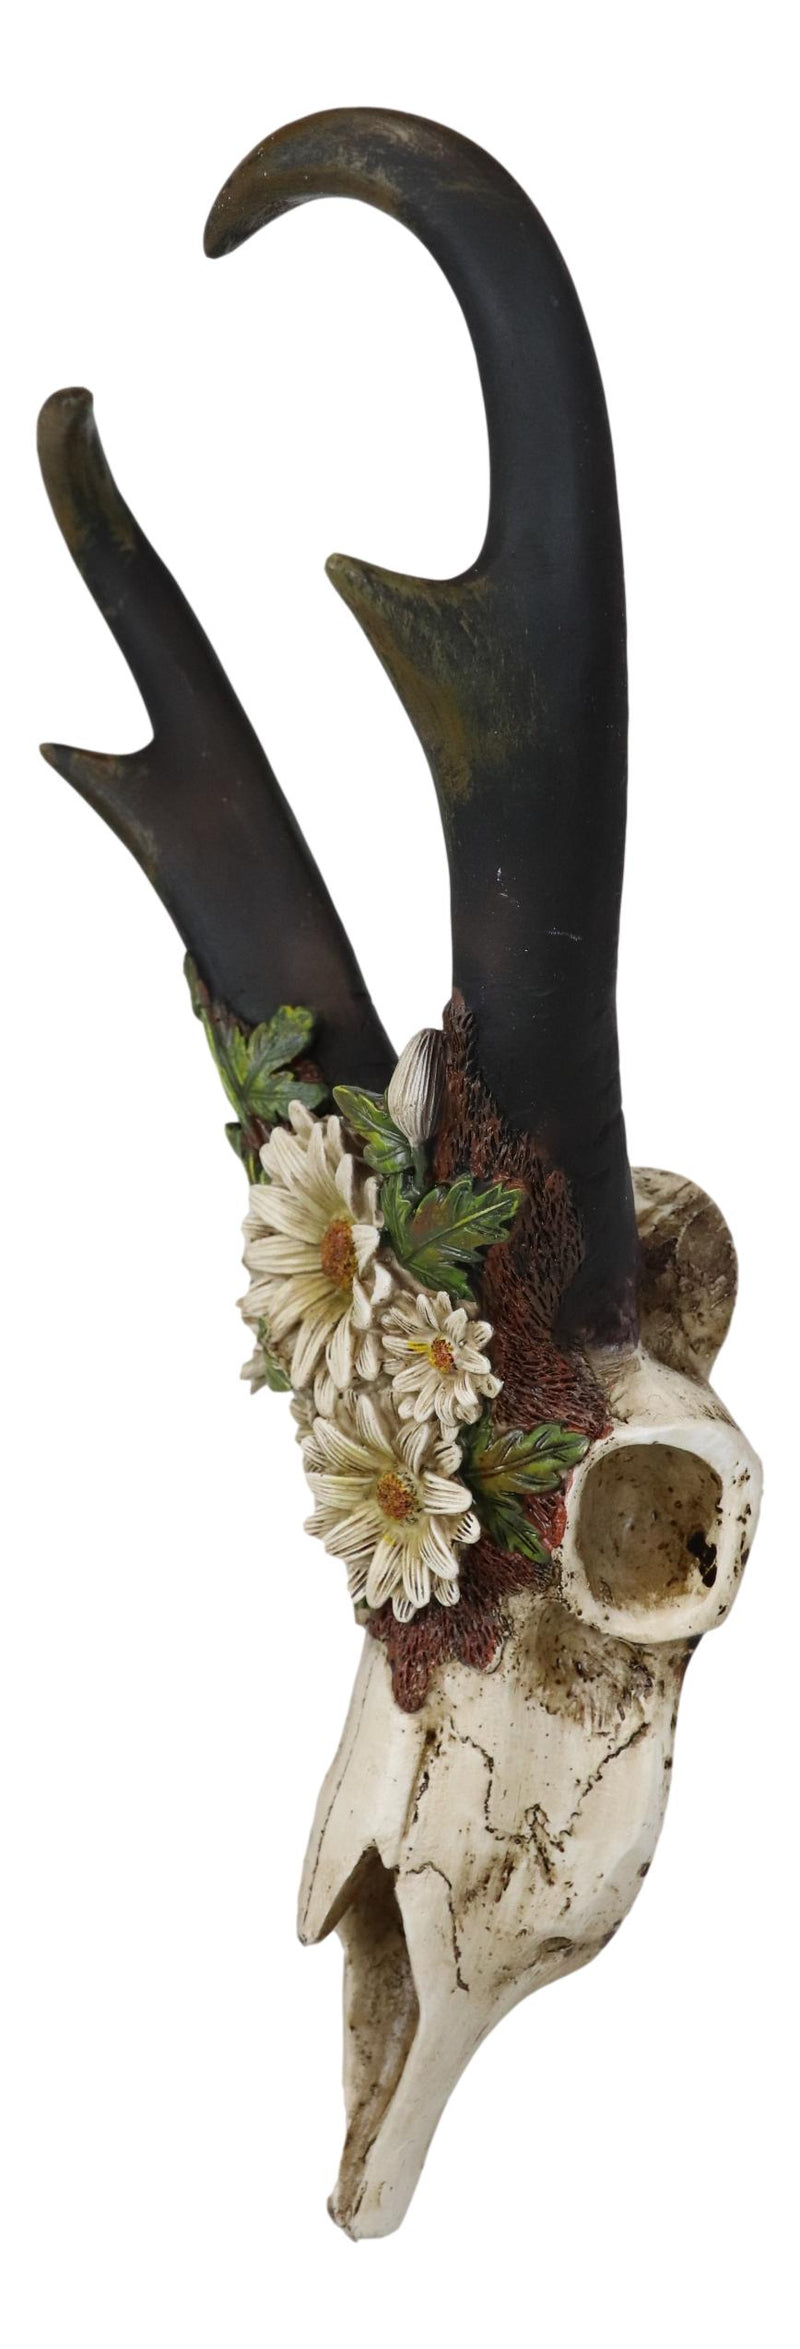 Western Rustic Pronghorn Antelope Skull With Antlers Feverfew Flowers Wall Decor